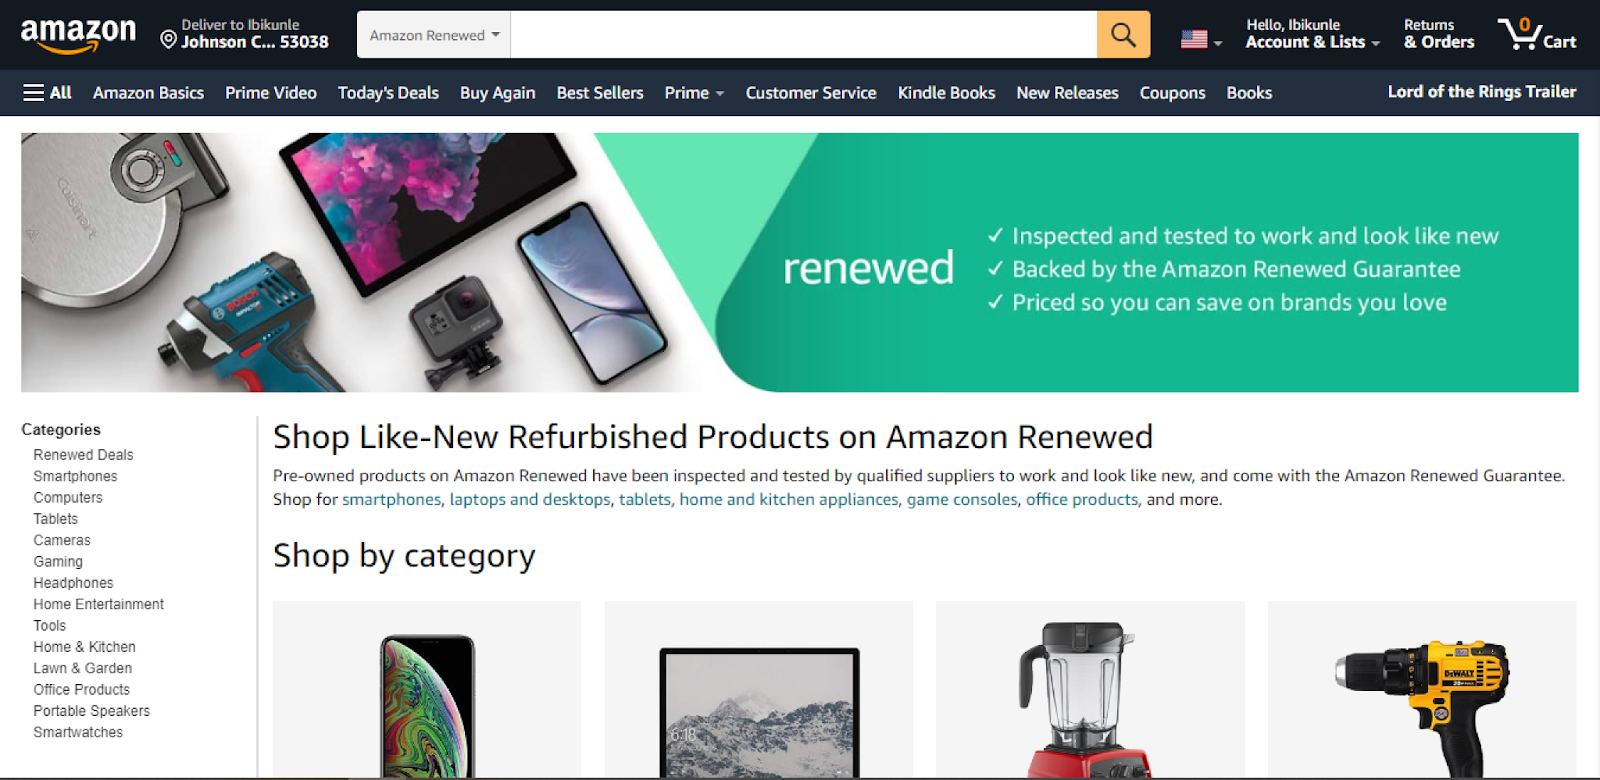 How can I find Amazon Renewed: Guide